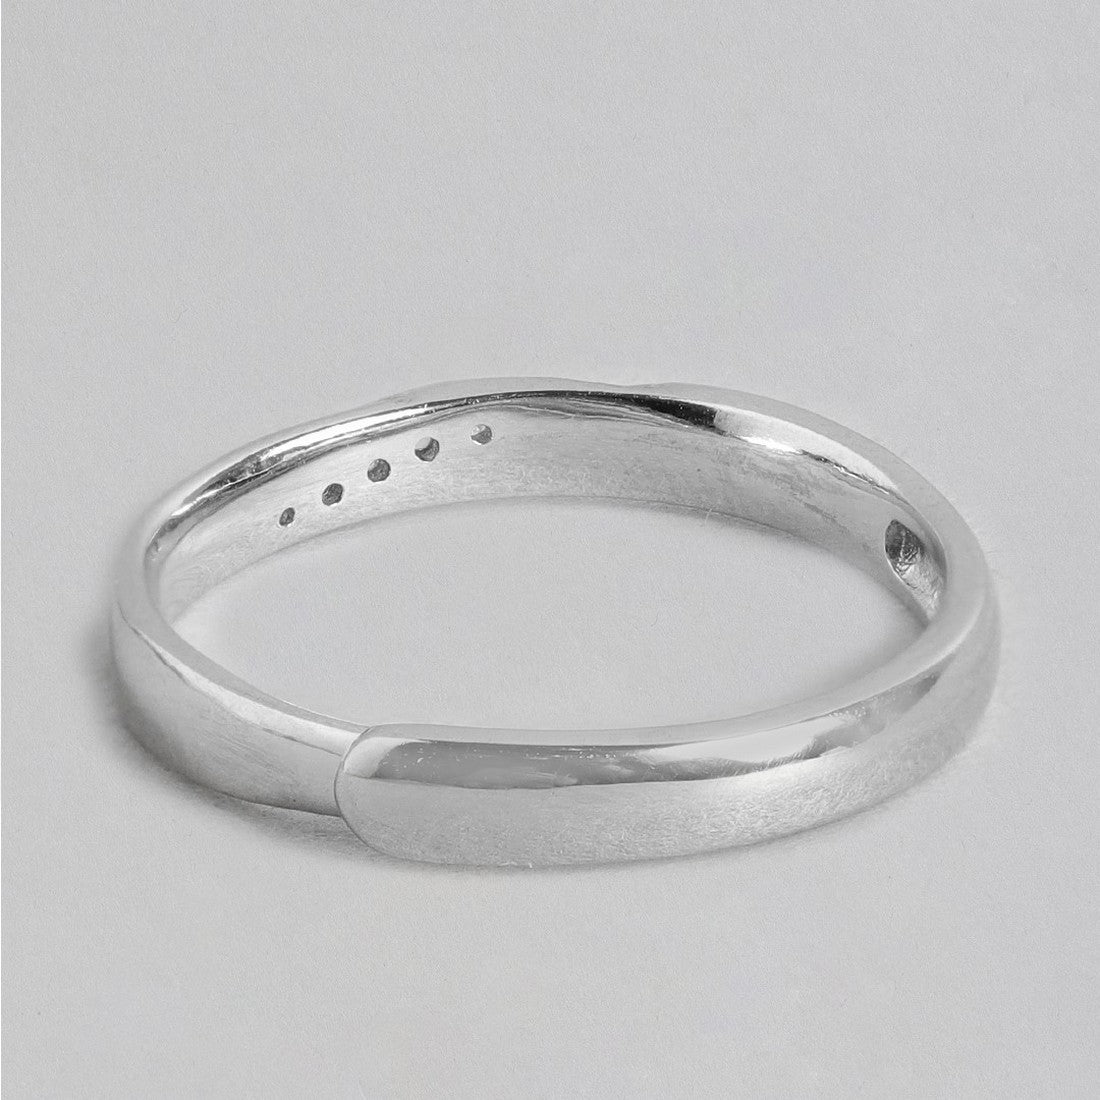 Minimal CZ Rhodium Plated 925 Sterling Silver Adjustable Ring For HER (Adjustable)